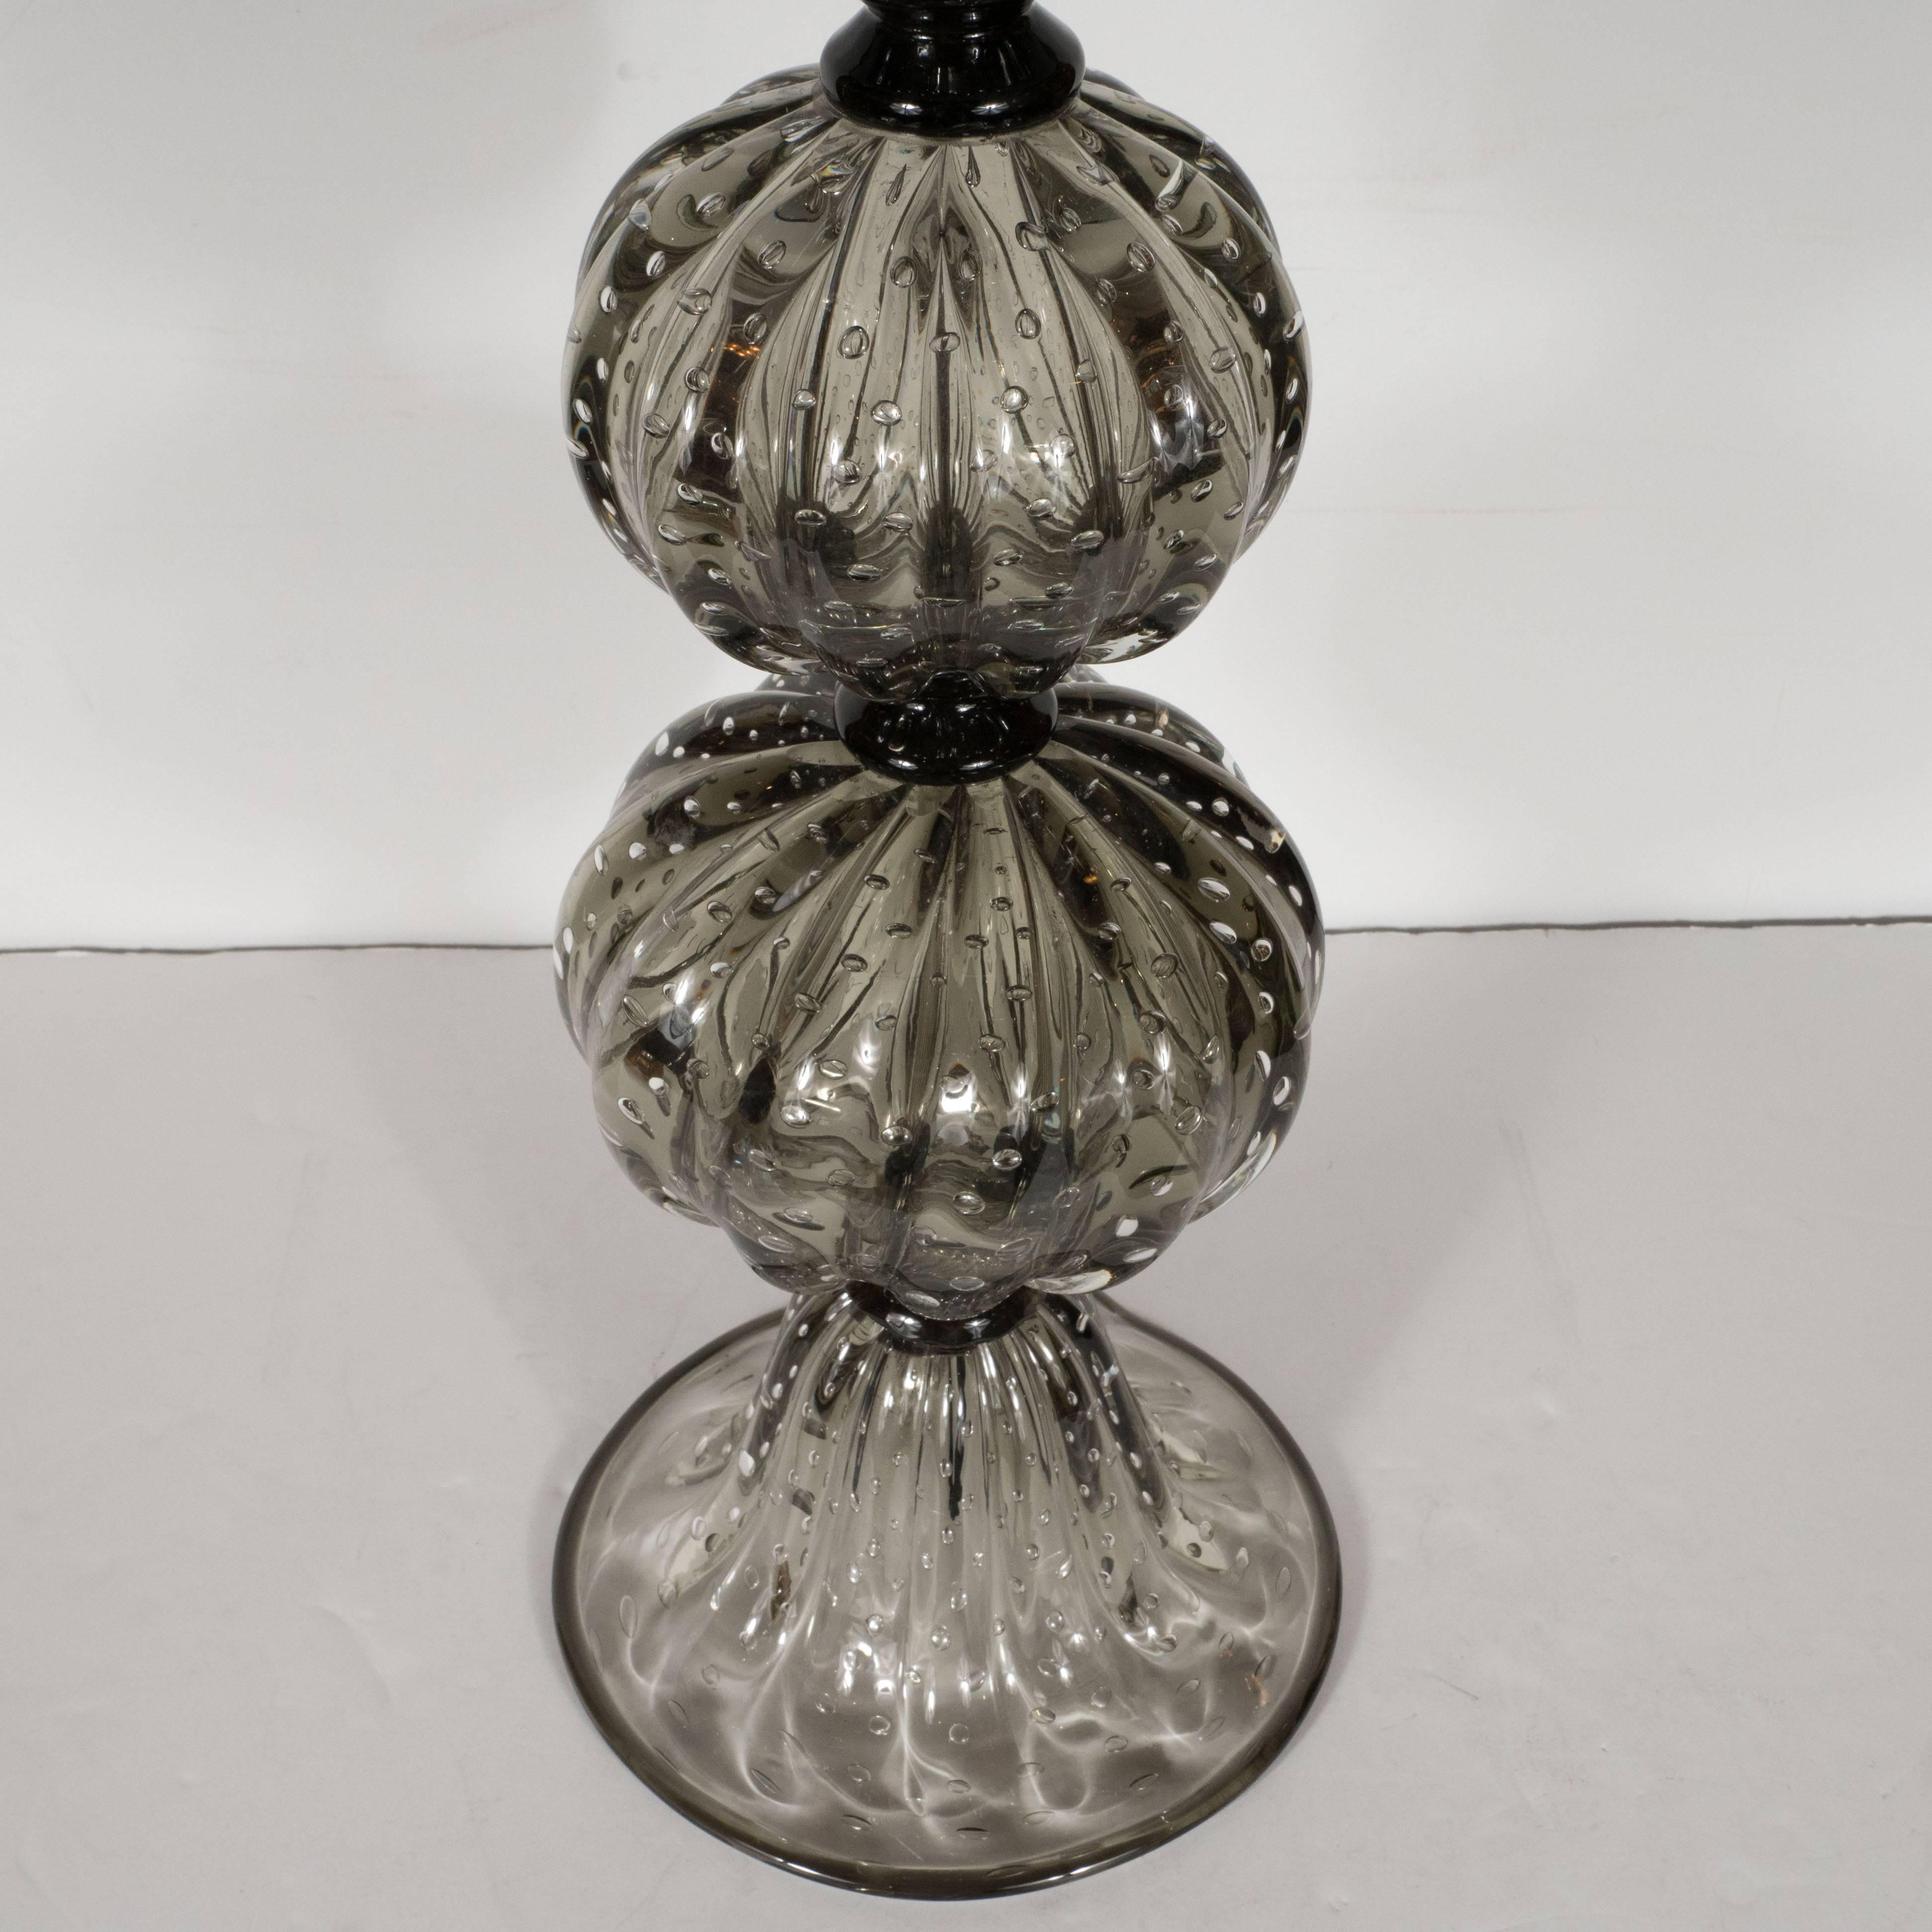 This sophisticated pair of smoked pewter lamps features three orbital forms with raised striations and suspended bubbles and a trumpet shaped base. The billowing forms are cinched in three places by black rings that offer a subtle transparency. The